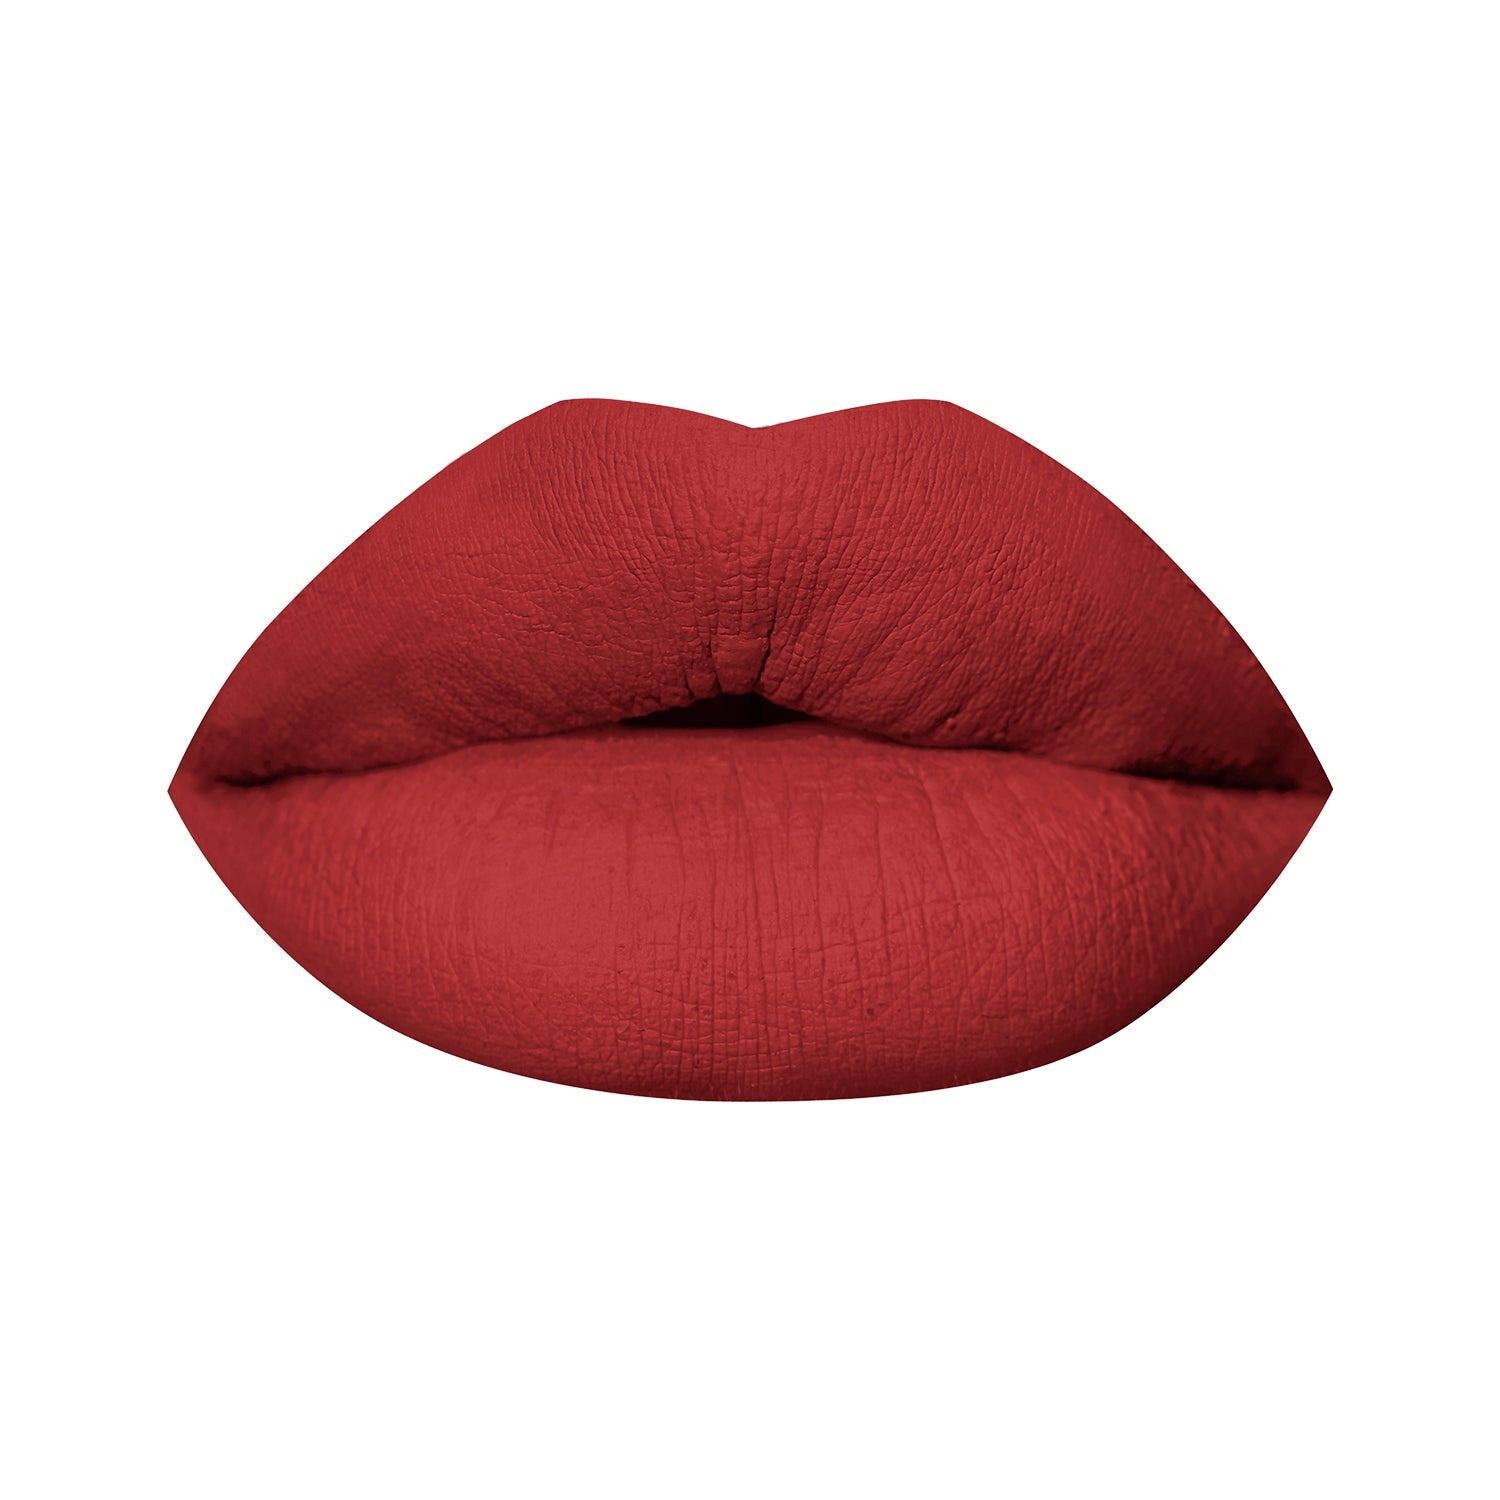 PAC Cosmetics Moody Matte Lipstick (1.6 gm) #Color_Masquered